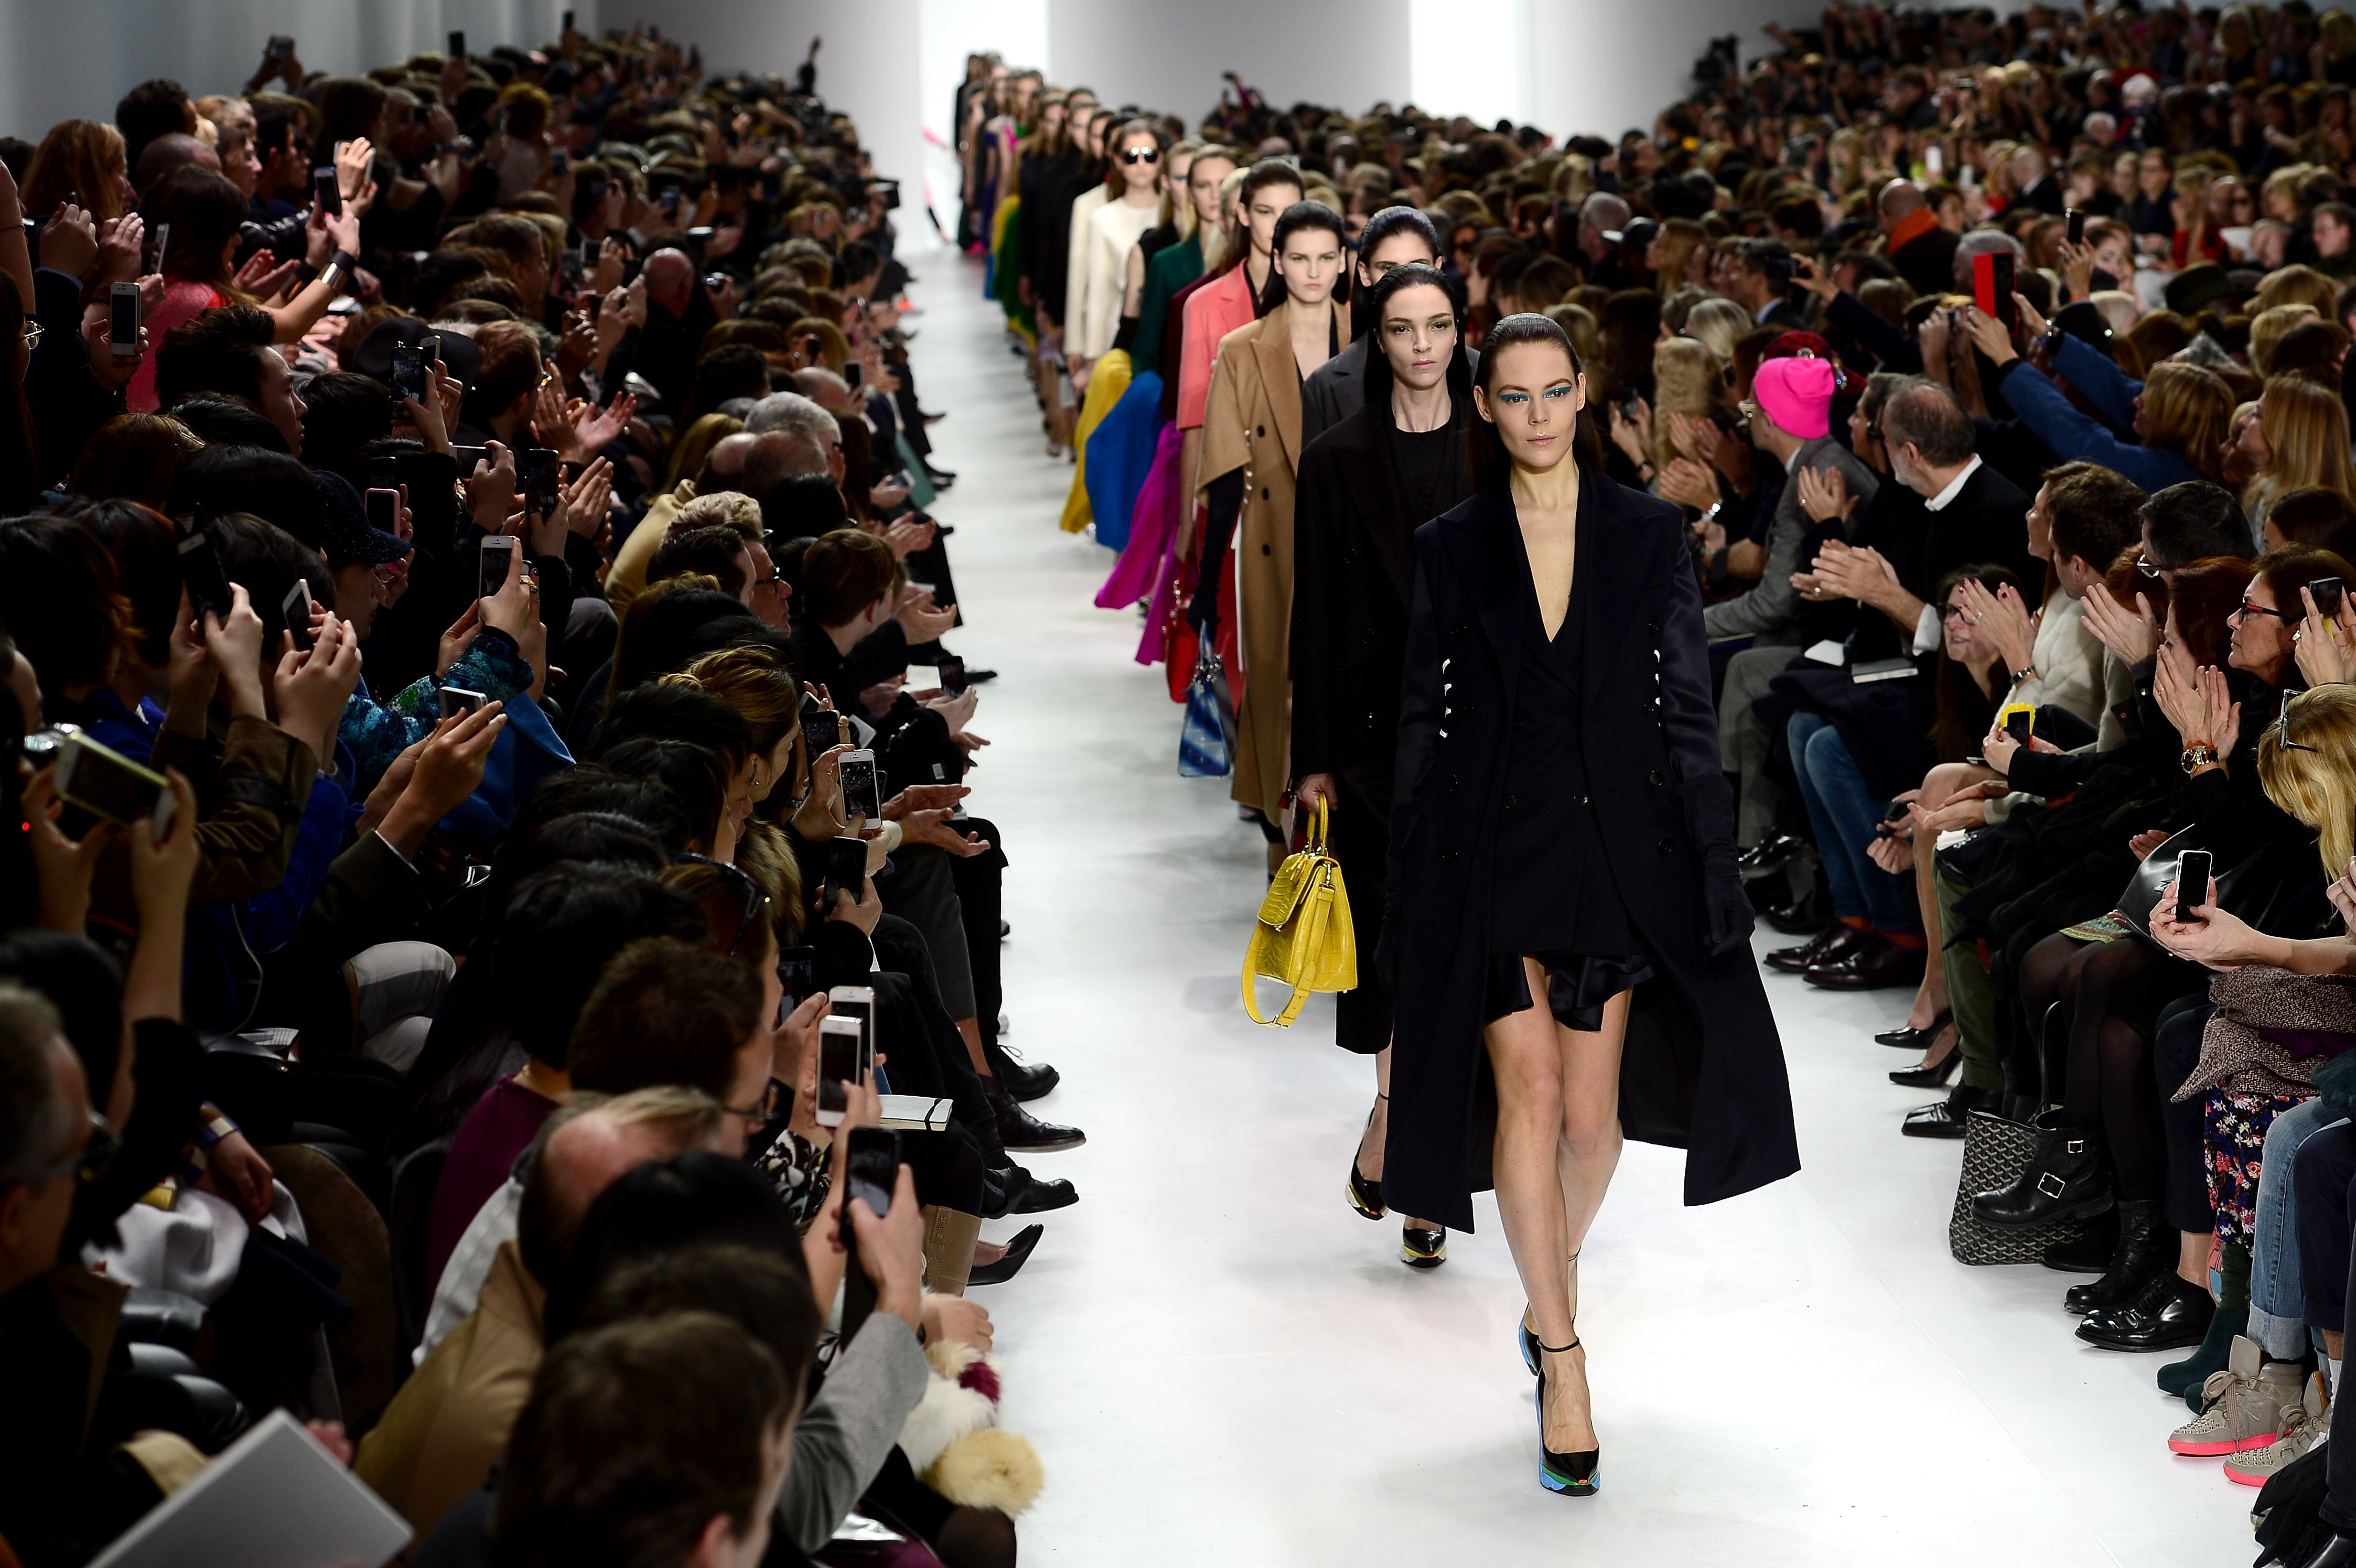 PARIS, FRANCE - FEBRUARY 28: Models walk the runway during the Christian Dior show as part of the Paris Fashion Week Womenswear Fall/Winter 2014-2015 on February 28, 2014 in Paris, France. (Photo by Dominique Charriau/Getty Images)